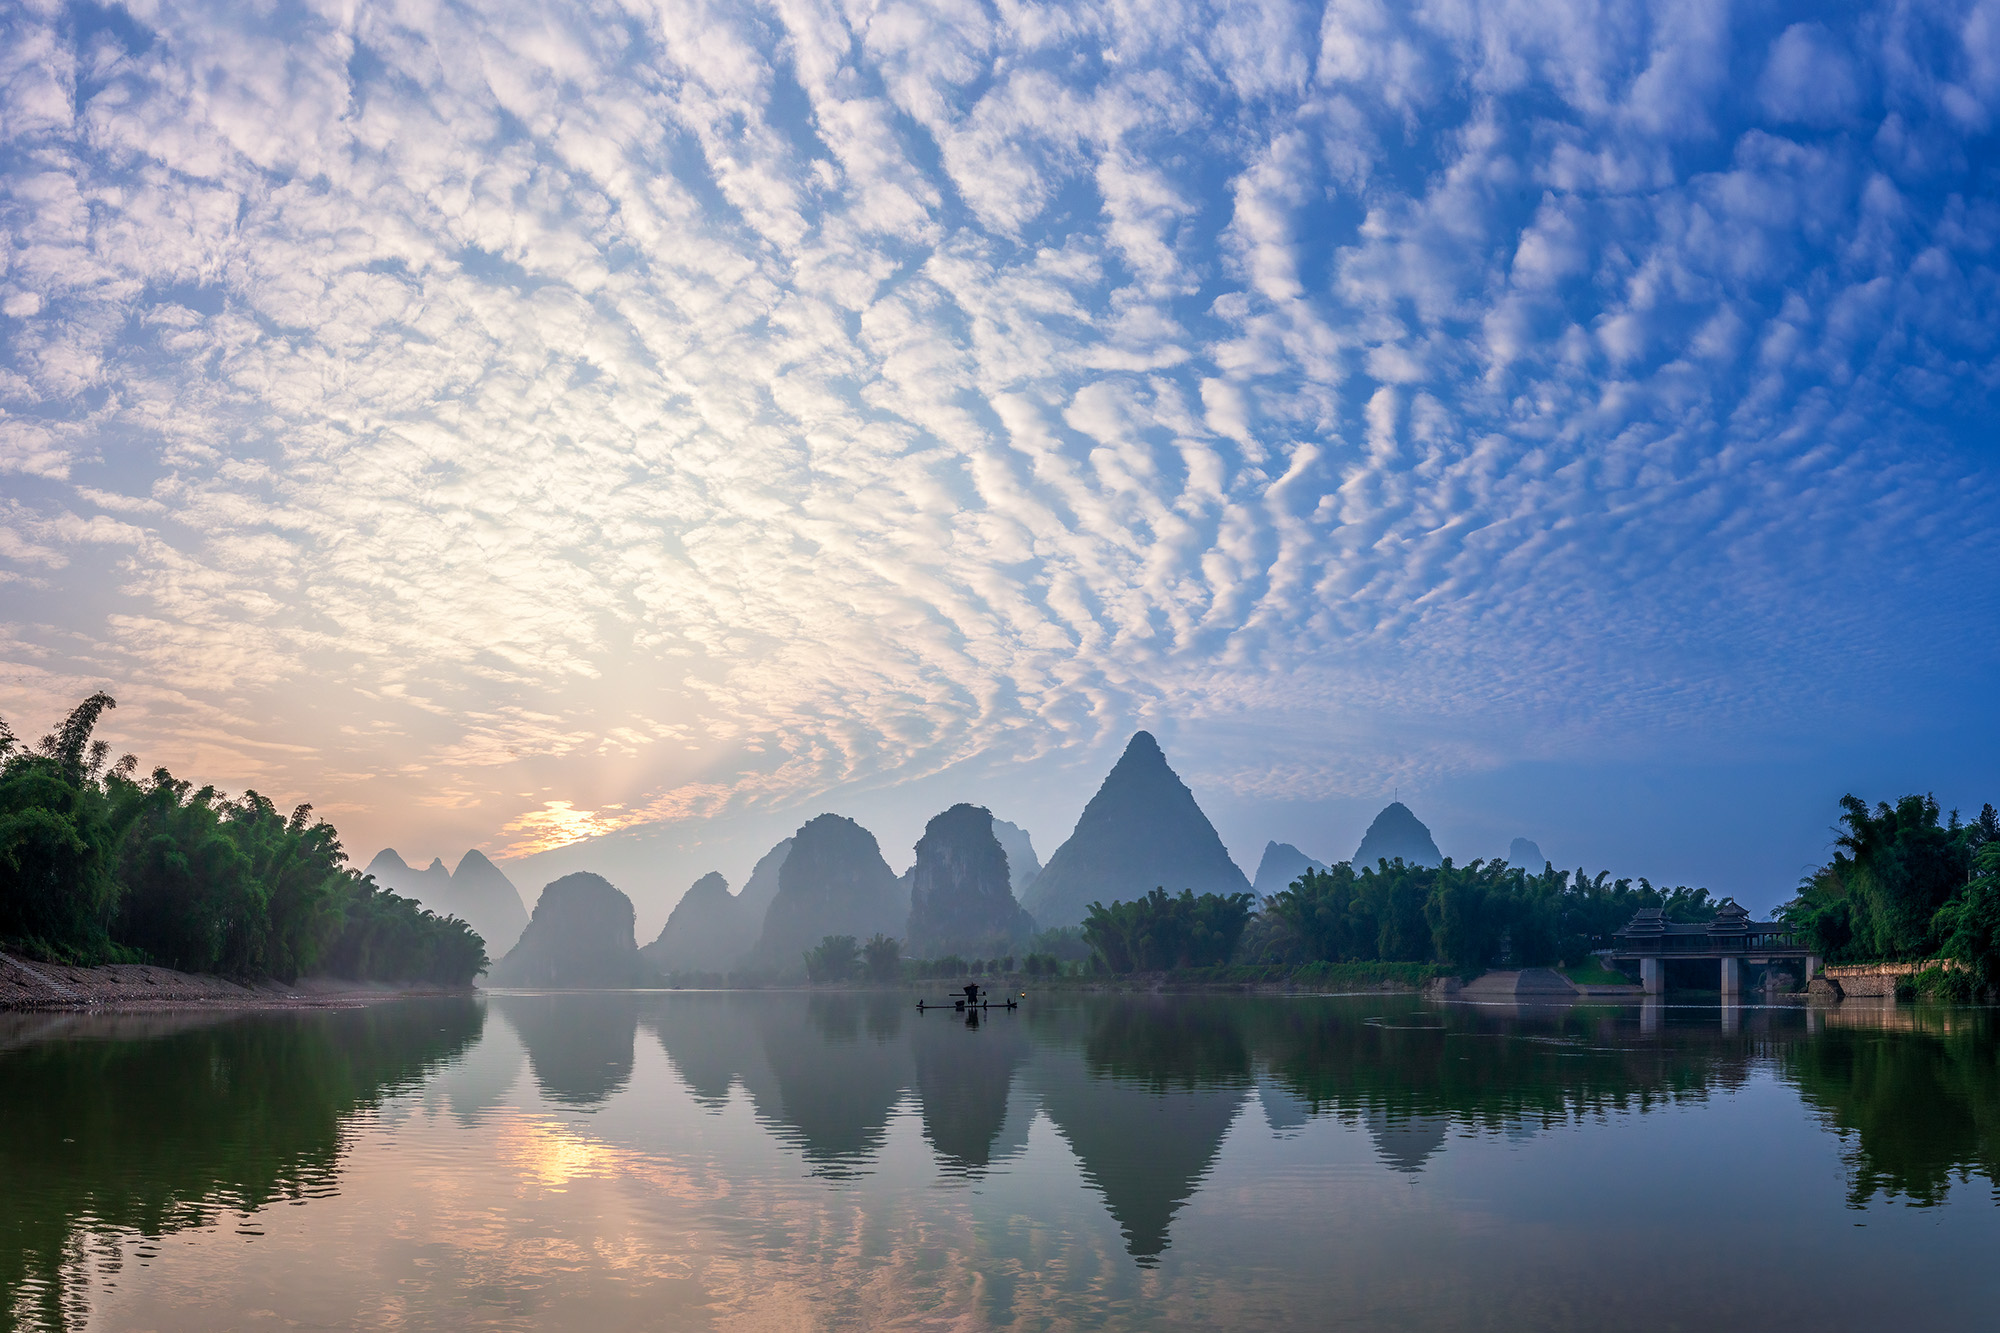 On the third day in a row, I rose at 4 AM with my guide, Lilly, and our driver to reach the Li River. There, we embarked on a...